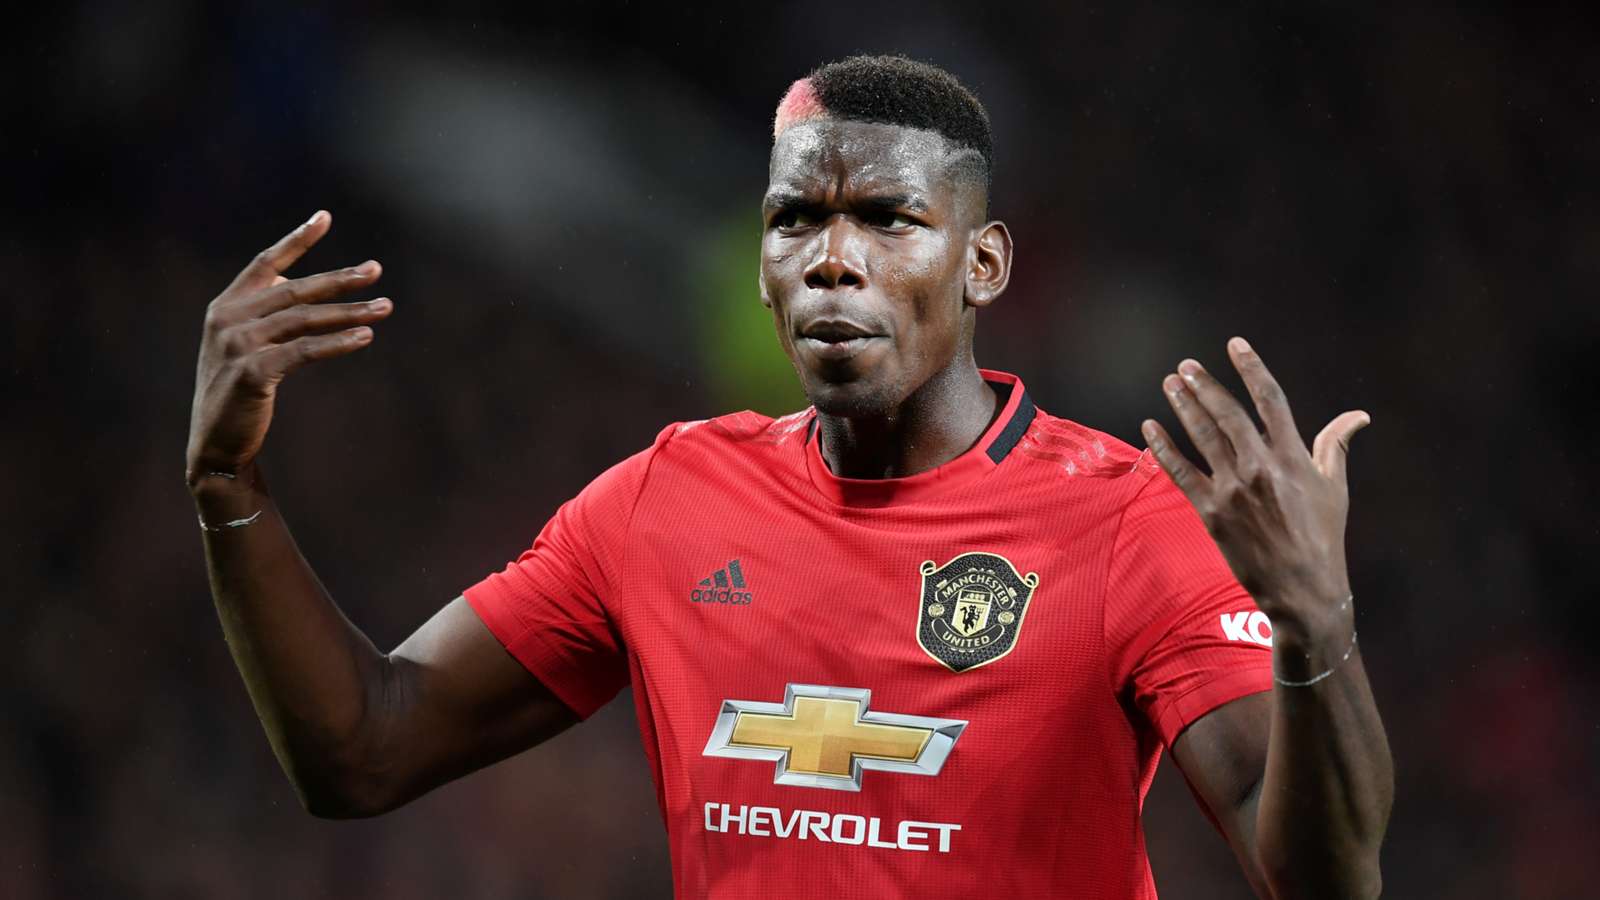 'Pogba will be moaning about something' - Scholes insists injured star won't help Man Utd on his return - Bóng Đá